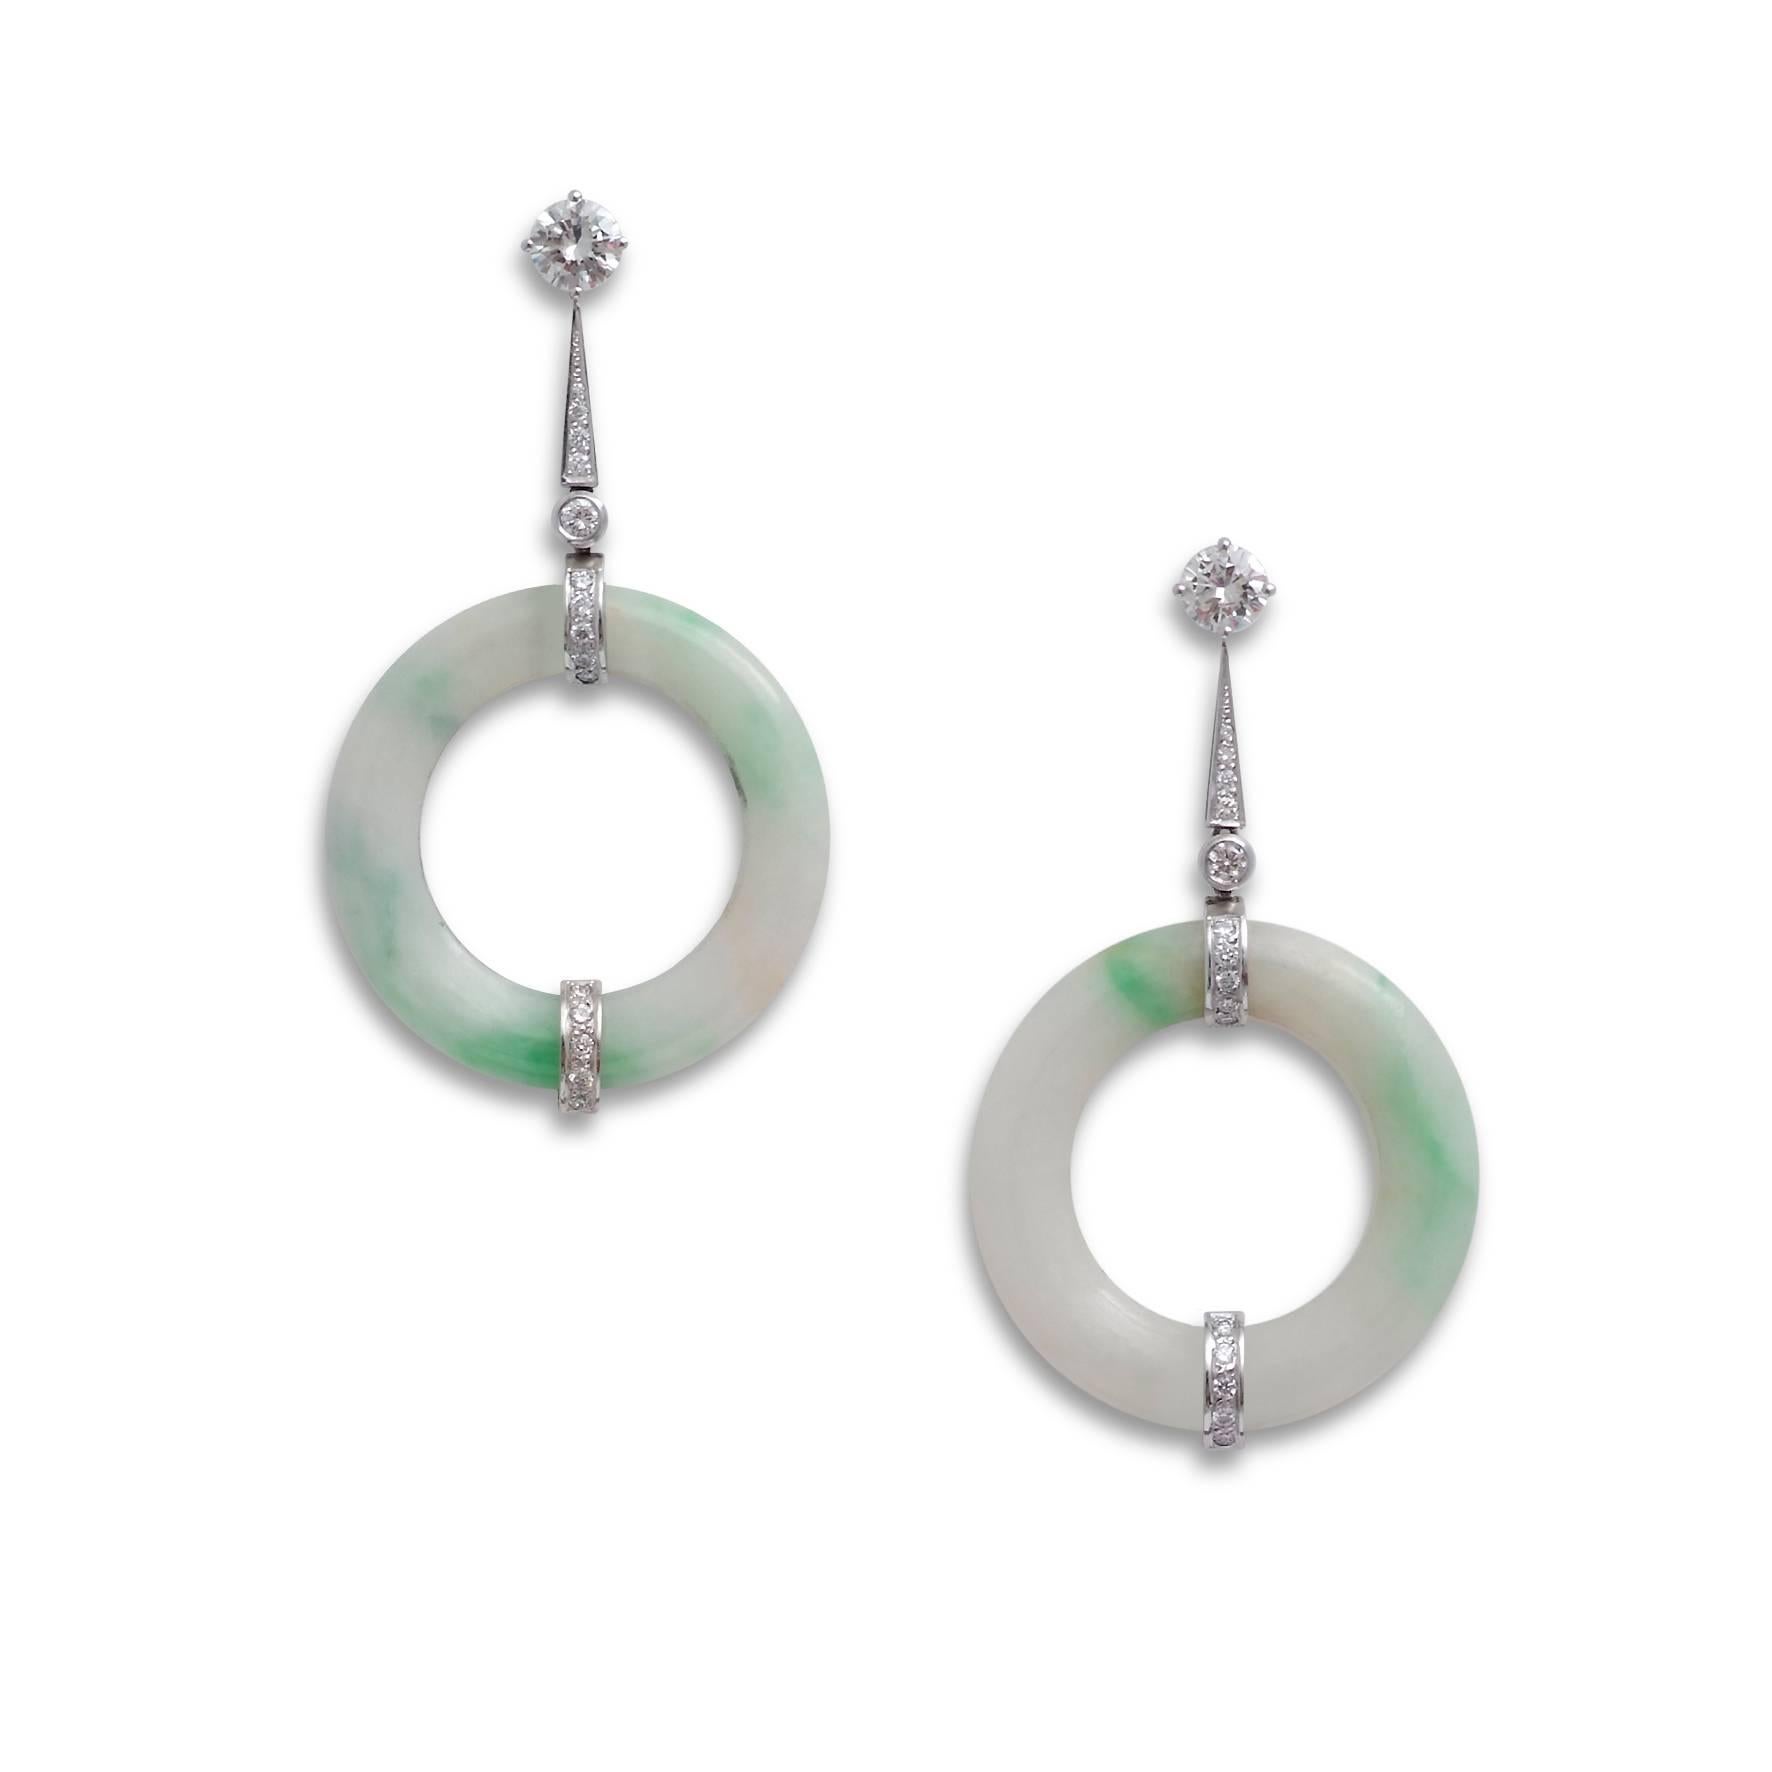 Jade disc ear-pendants with diamond terminals and detachable diamond stud tops, the two brilliant-cut diamonds weighing 0.91ct and 0.82ct respectively, mounted in 18ct white gold

Made to order